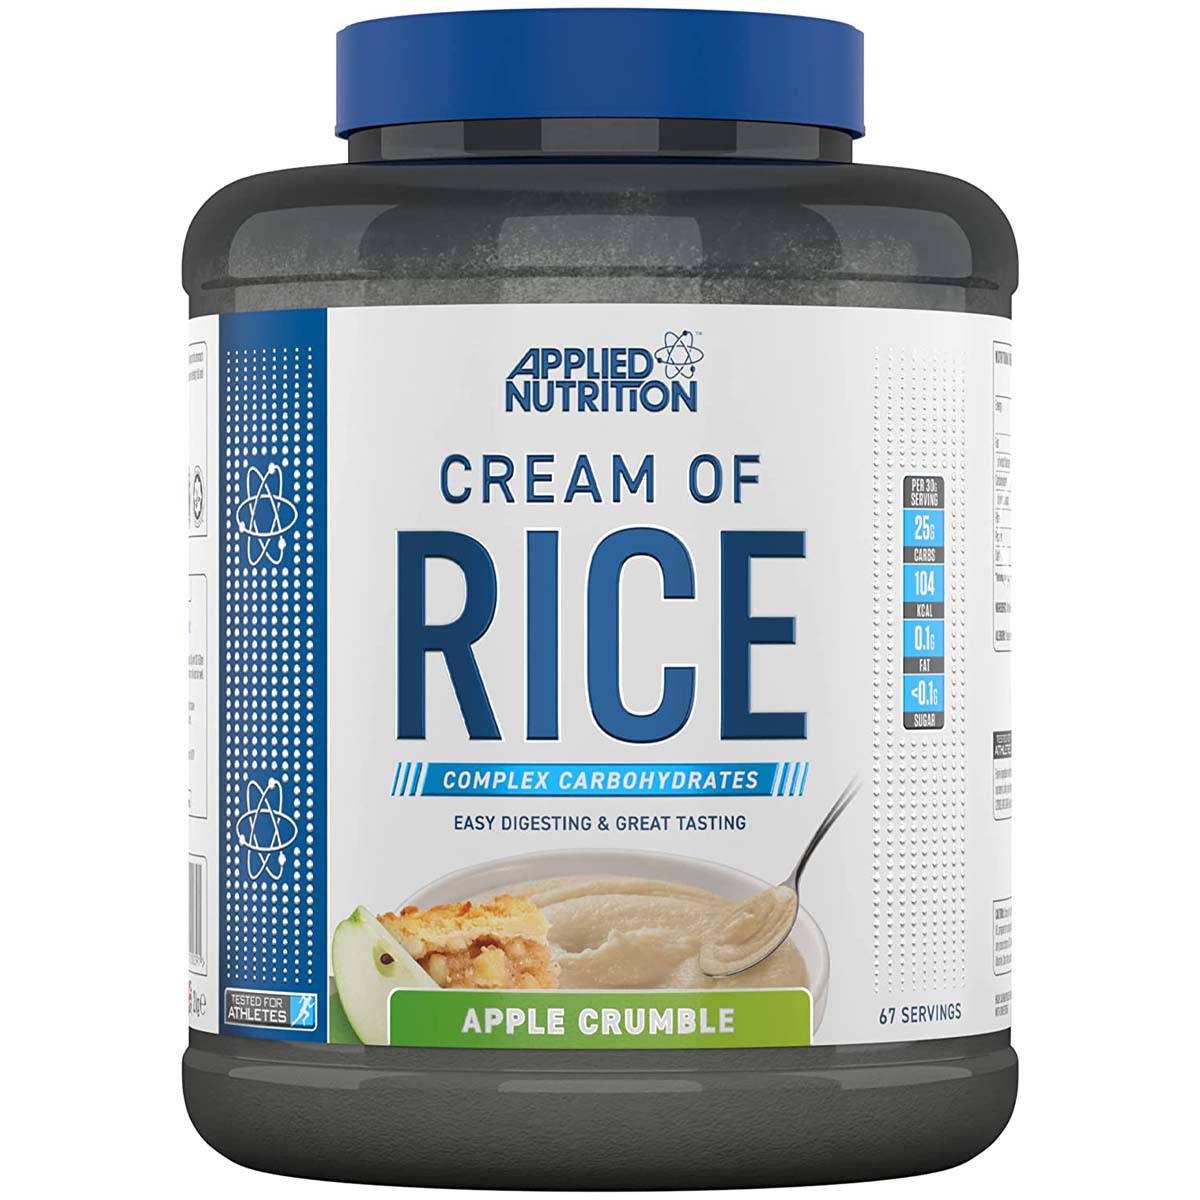 Applied Nutrition Cream of Rice, Apple Crumble, 2 KG